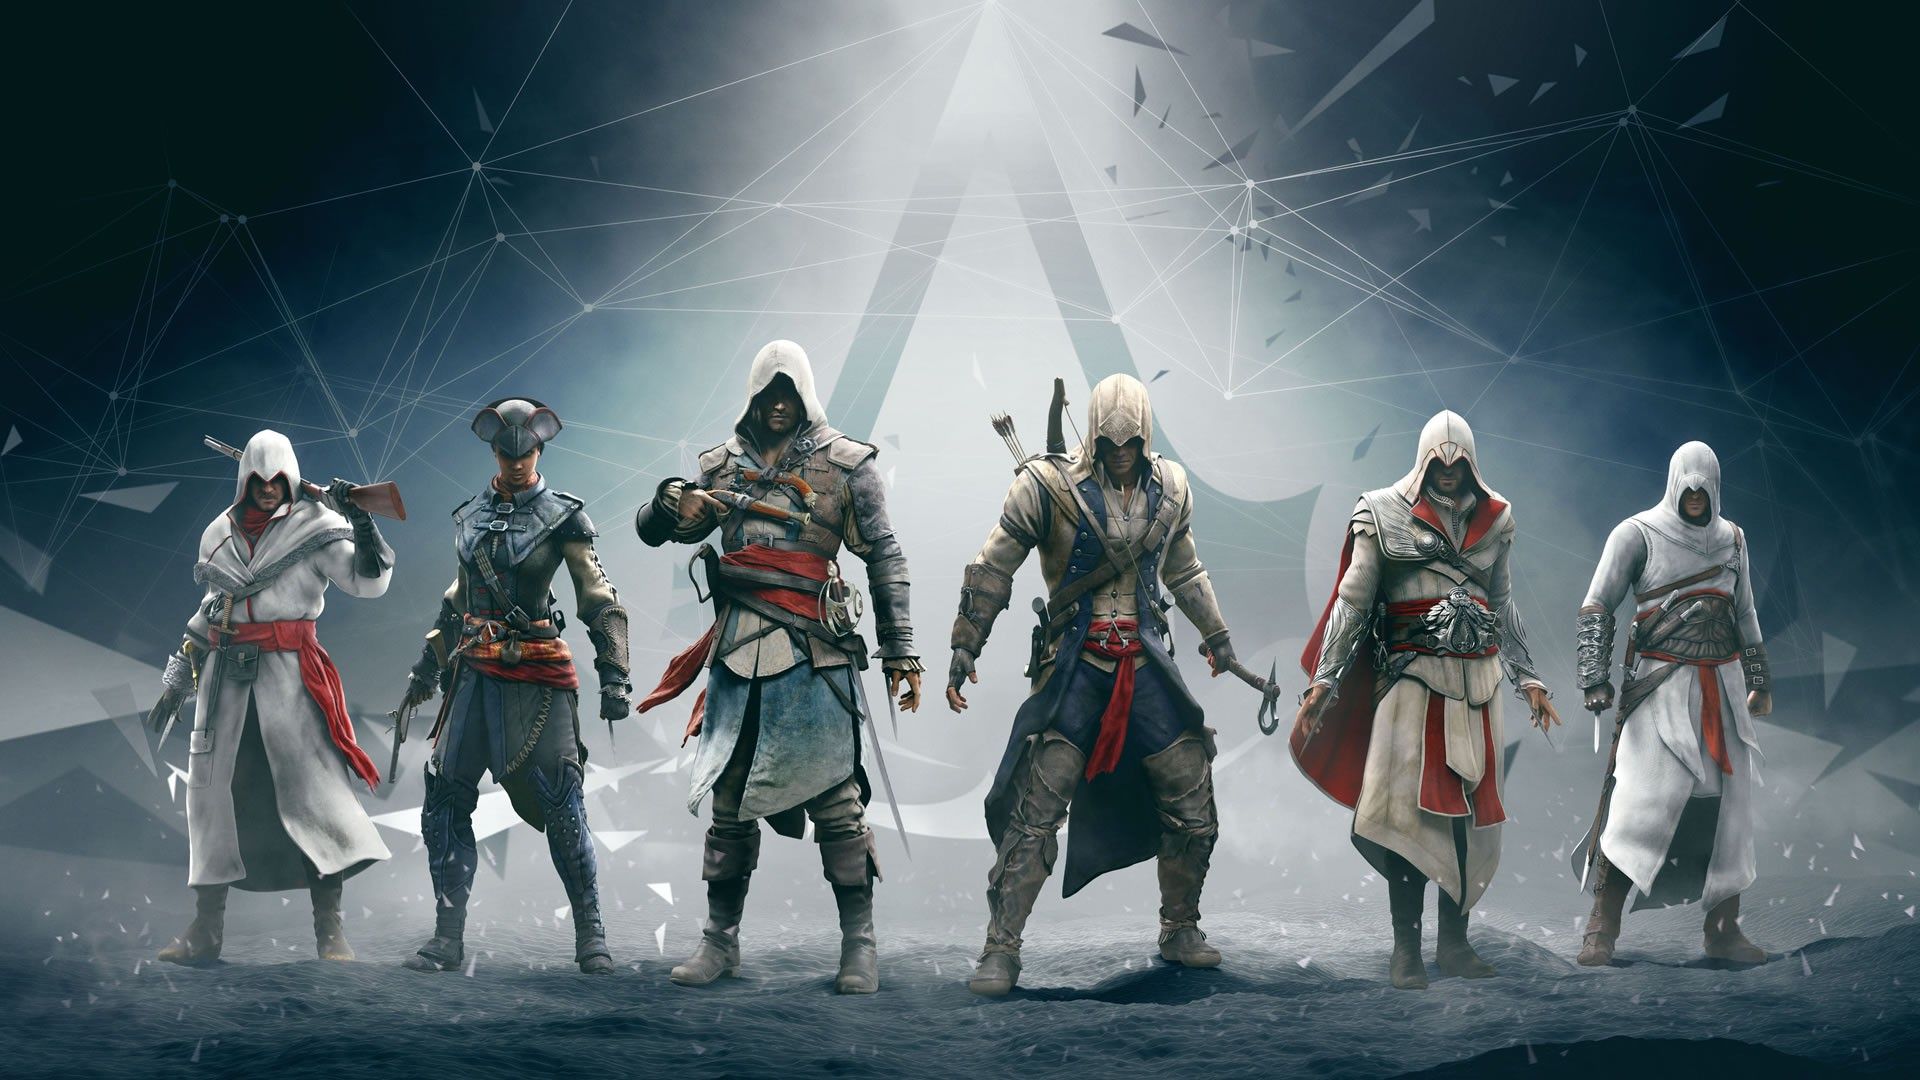 The Definitive Chronological Playing Order Of The Assassin's Creed Games